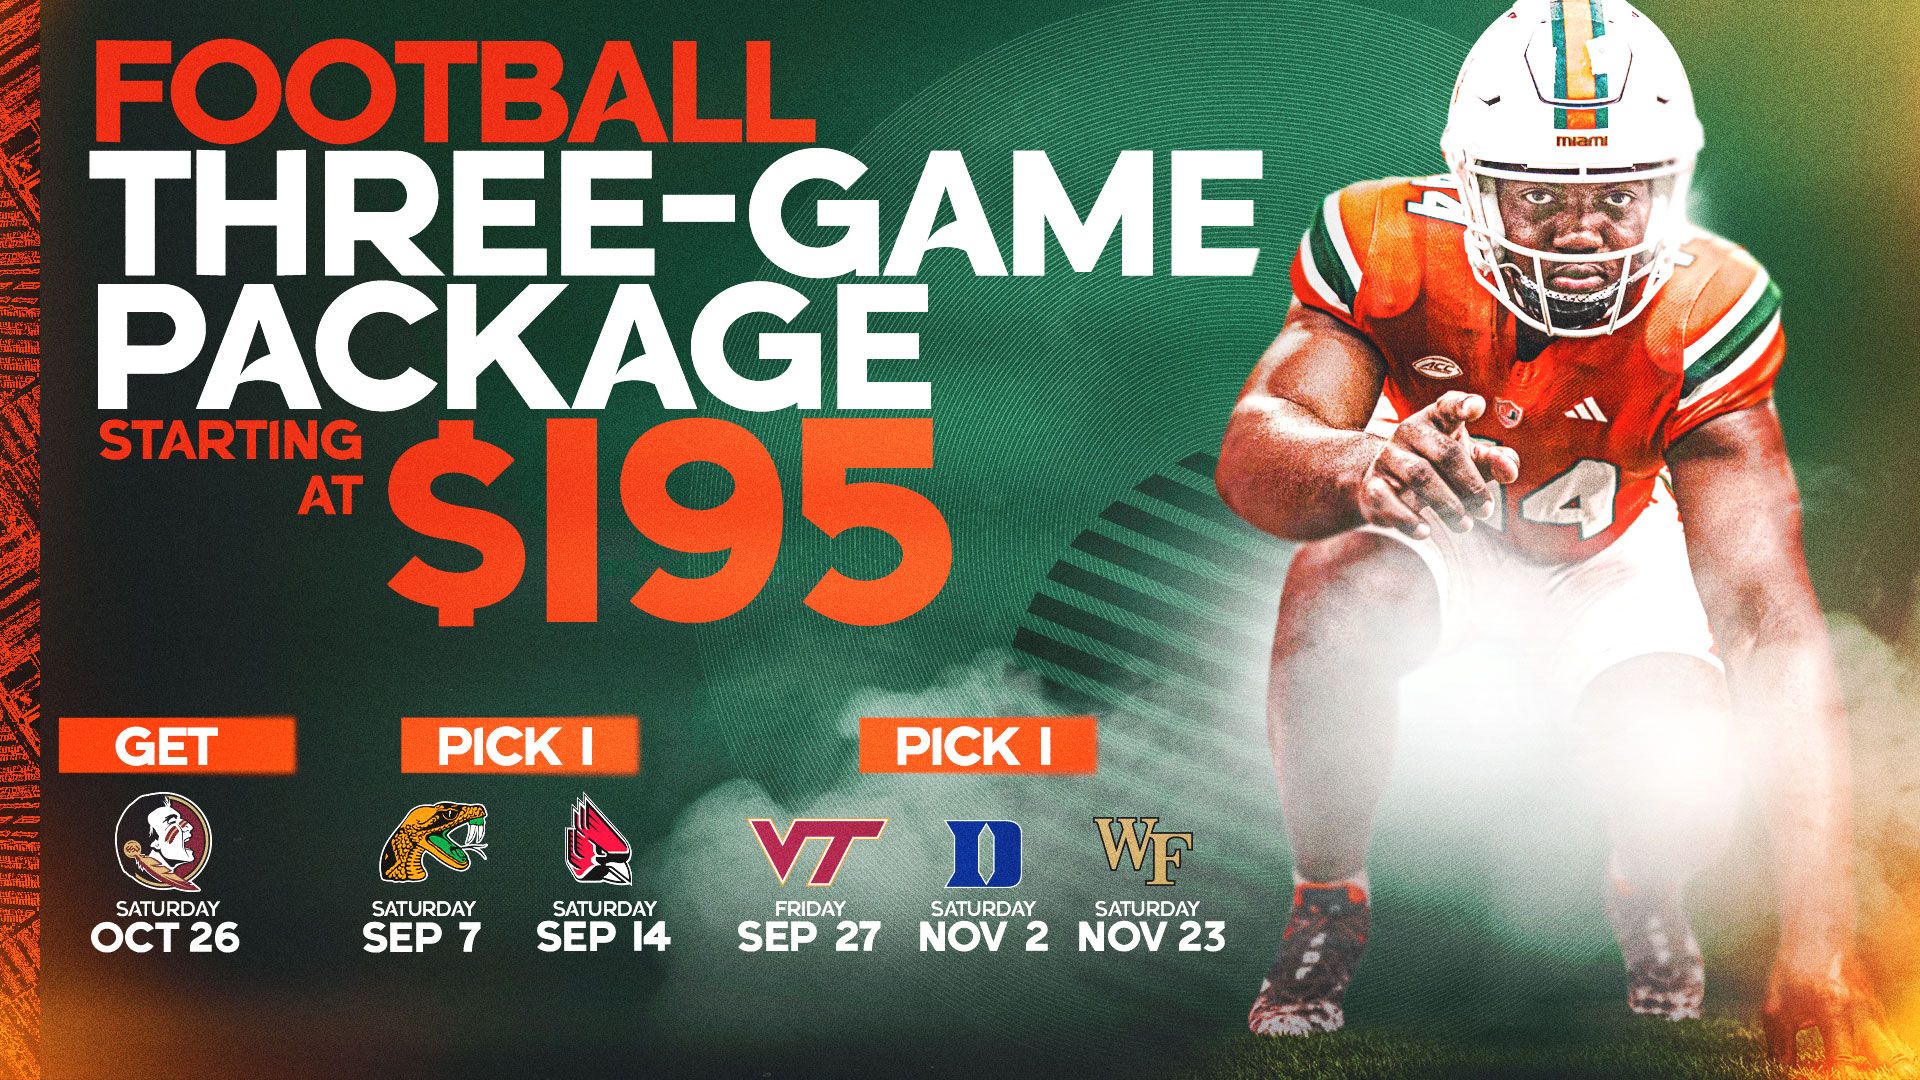 3-Game Package is Available!